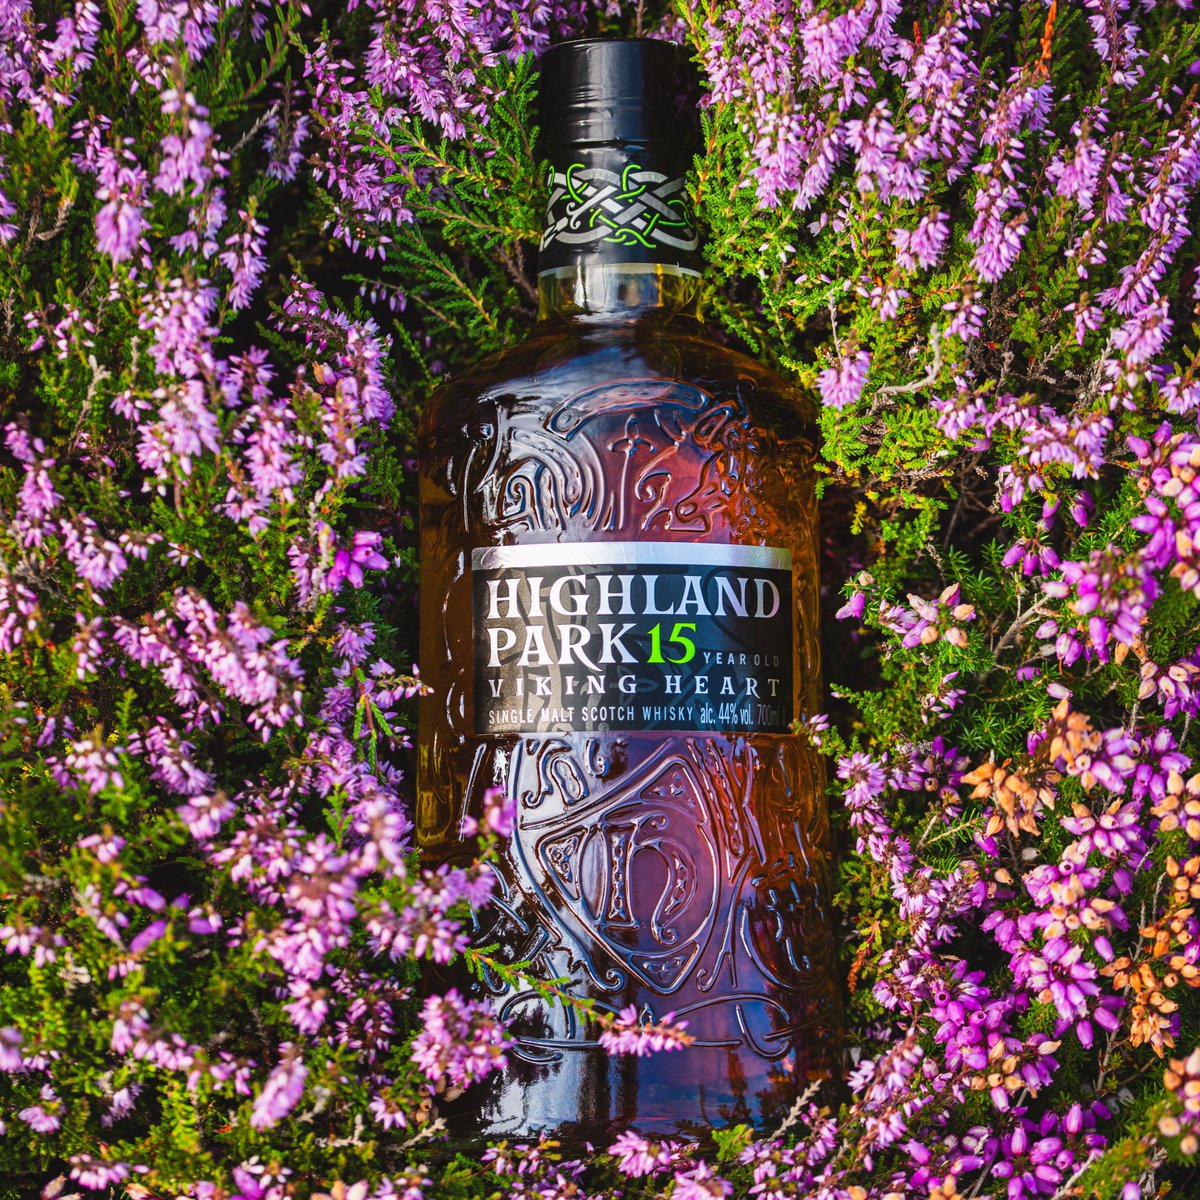 Discover how Orkney's artistic community and unique landscape have shaped Highland Park Whisky, crafted there for over 225 years. Discover more about #OrkneyStories on our website: highlandparkwhisky.com/orkney-stories Enjoy responsibly. #HighlandParkWhisky